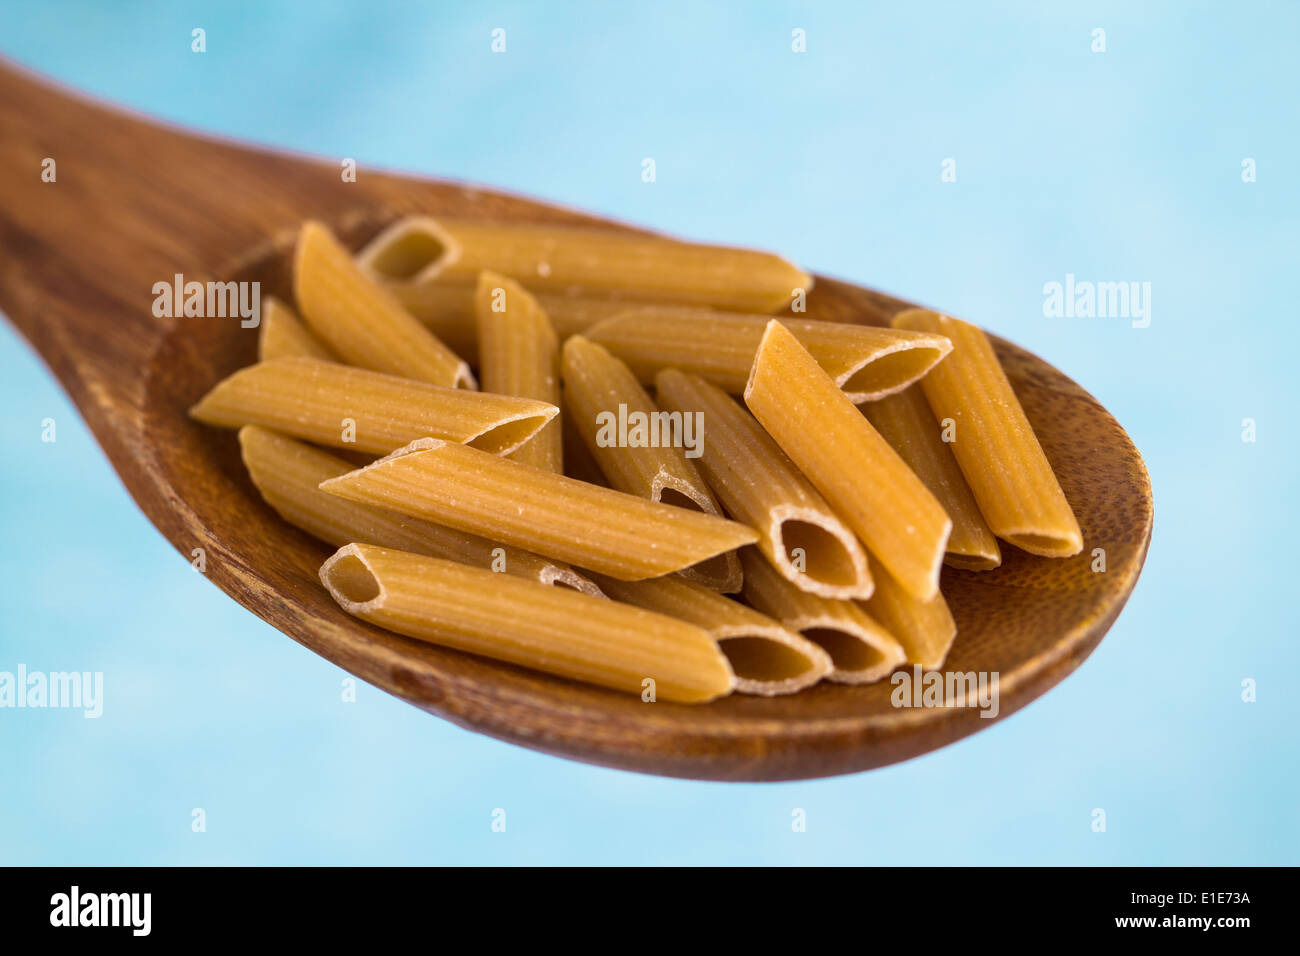 A hand holding a wooden spoon with wholemeal penne pasta Stock Photo